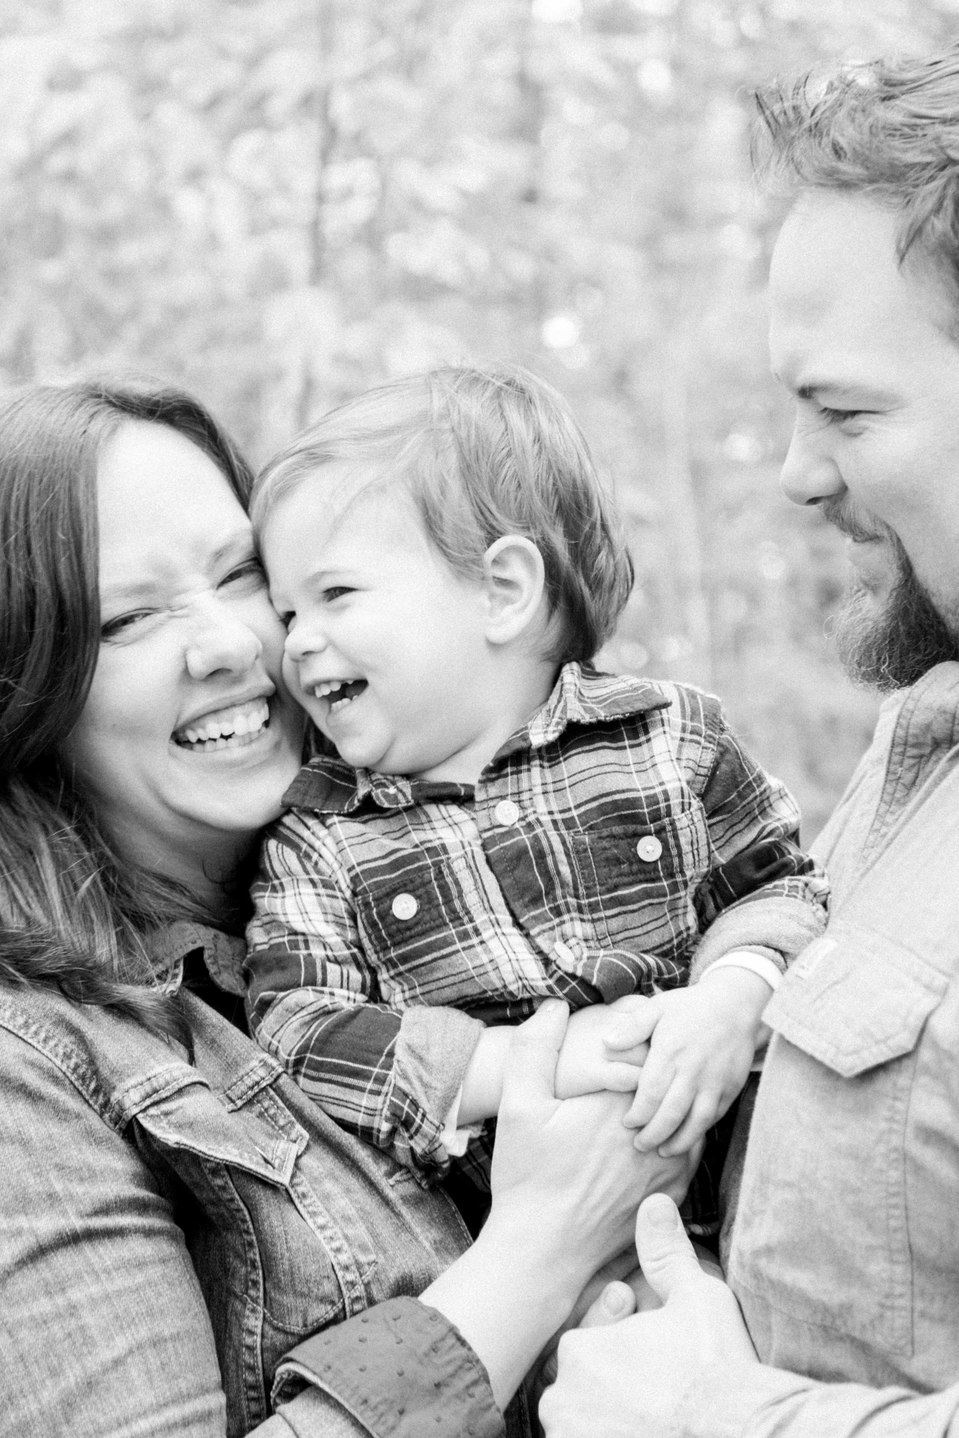 Black and white portrait of family of three with little boy laughing at mother, Fall photos, Niagara family photographer, family photography, Niagara portrait photographer, portrait photography, Emily VanderBeek Photography.